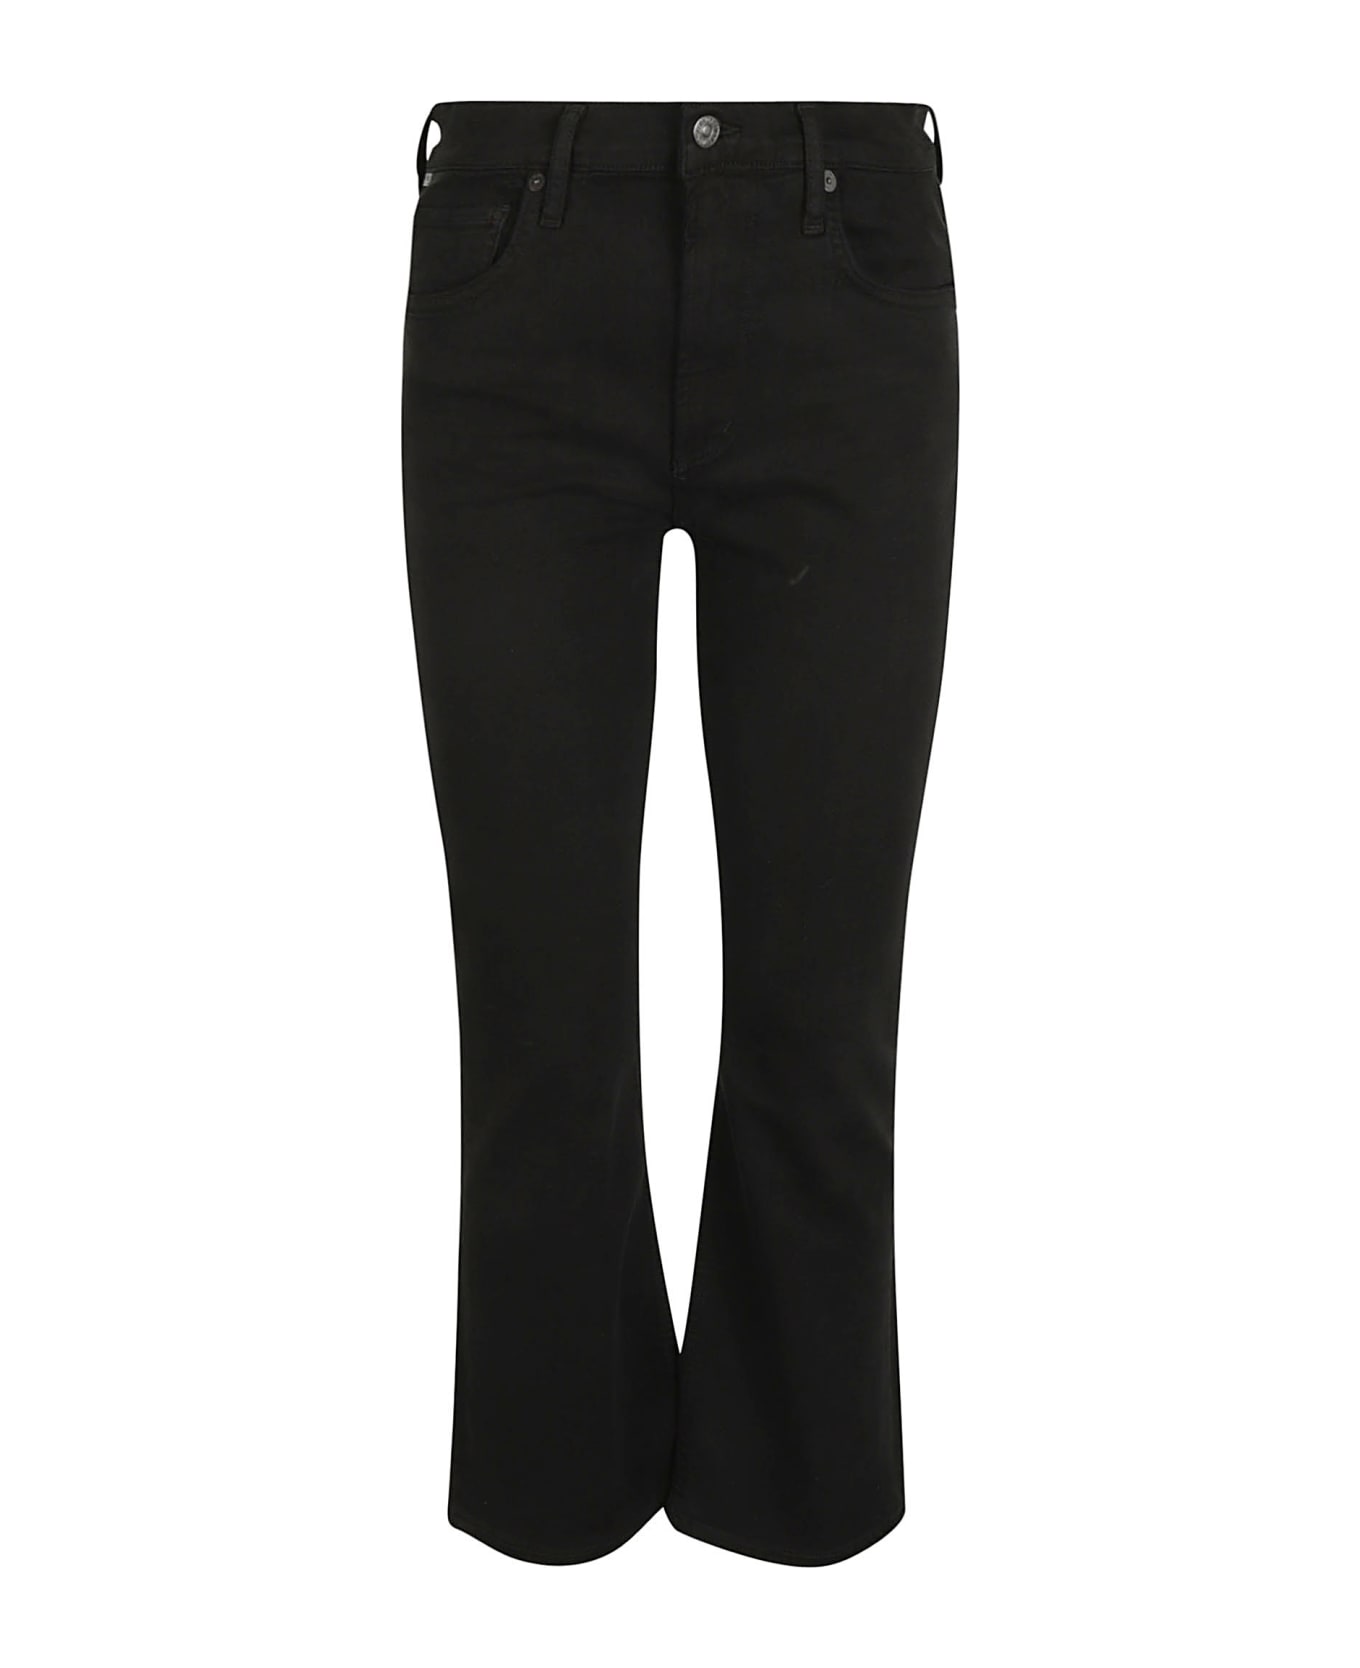 Citizens of Humanity Flared Leg Jeans - Black